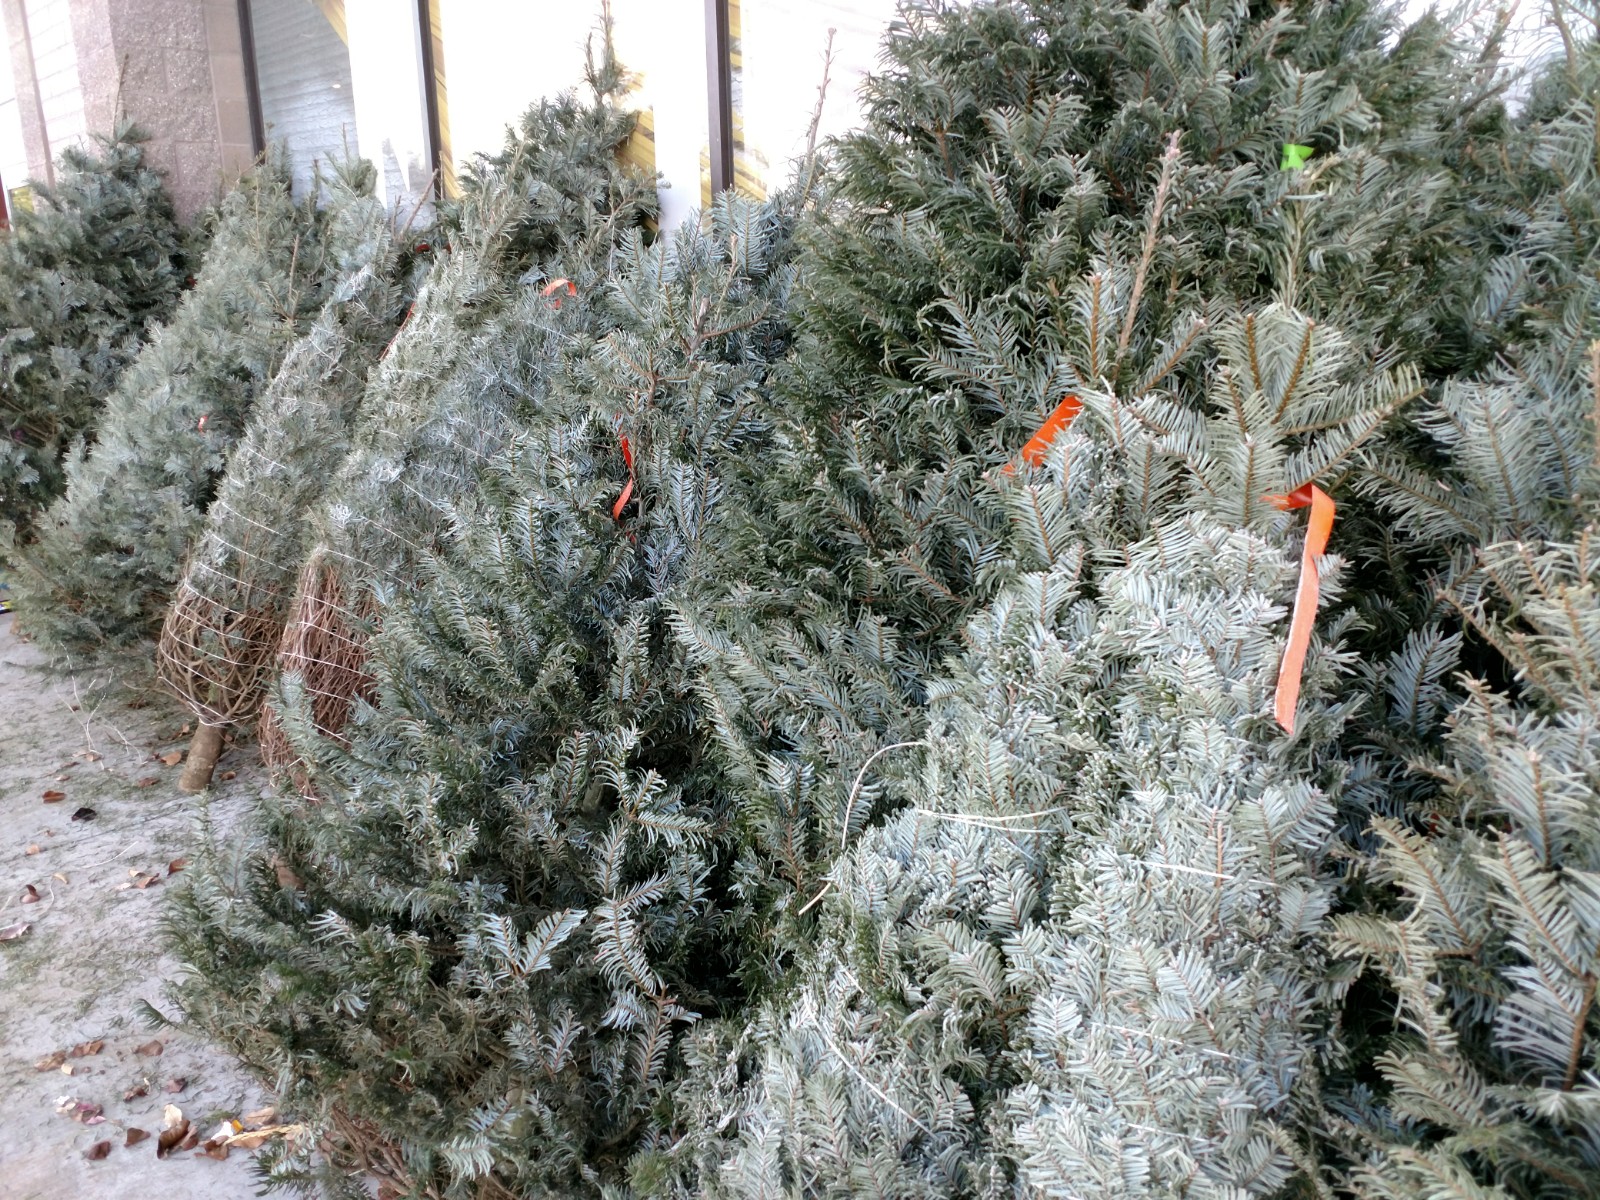 Broulim's is one of the places you can get Christmas trees in Rexburg.